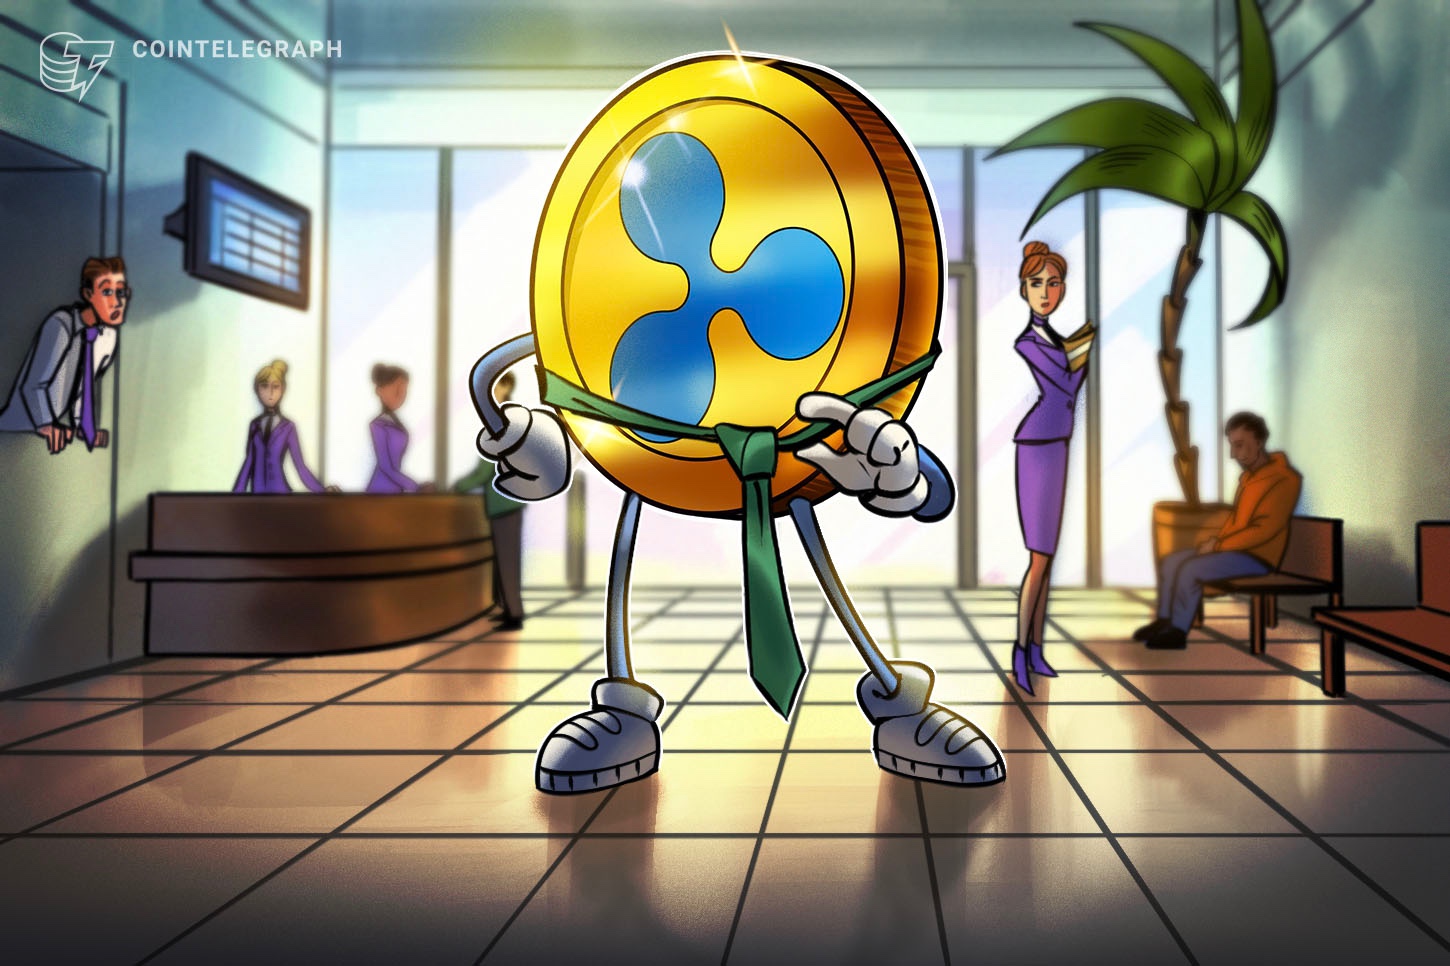 Ripple faces securities suit in California over CEO's ‘misleading statement’